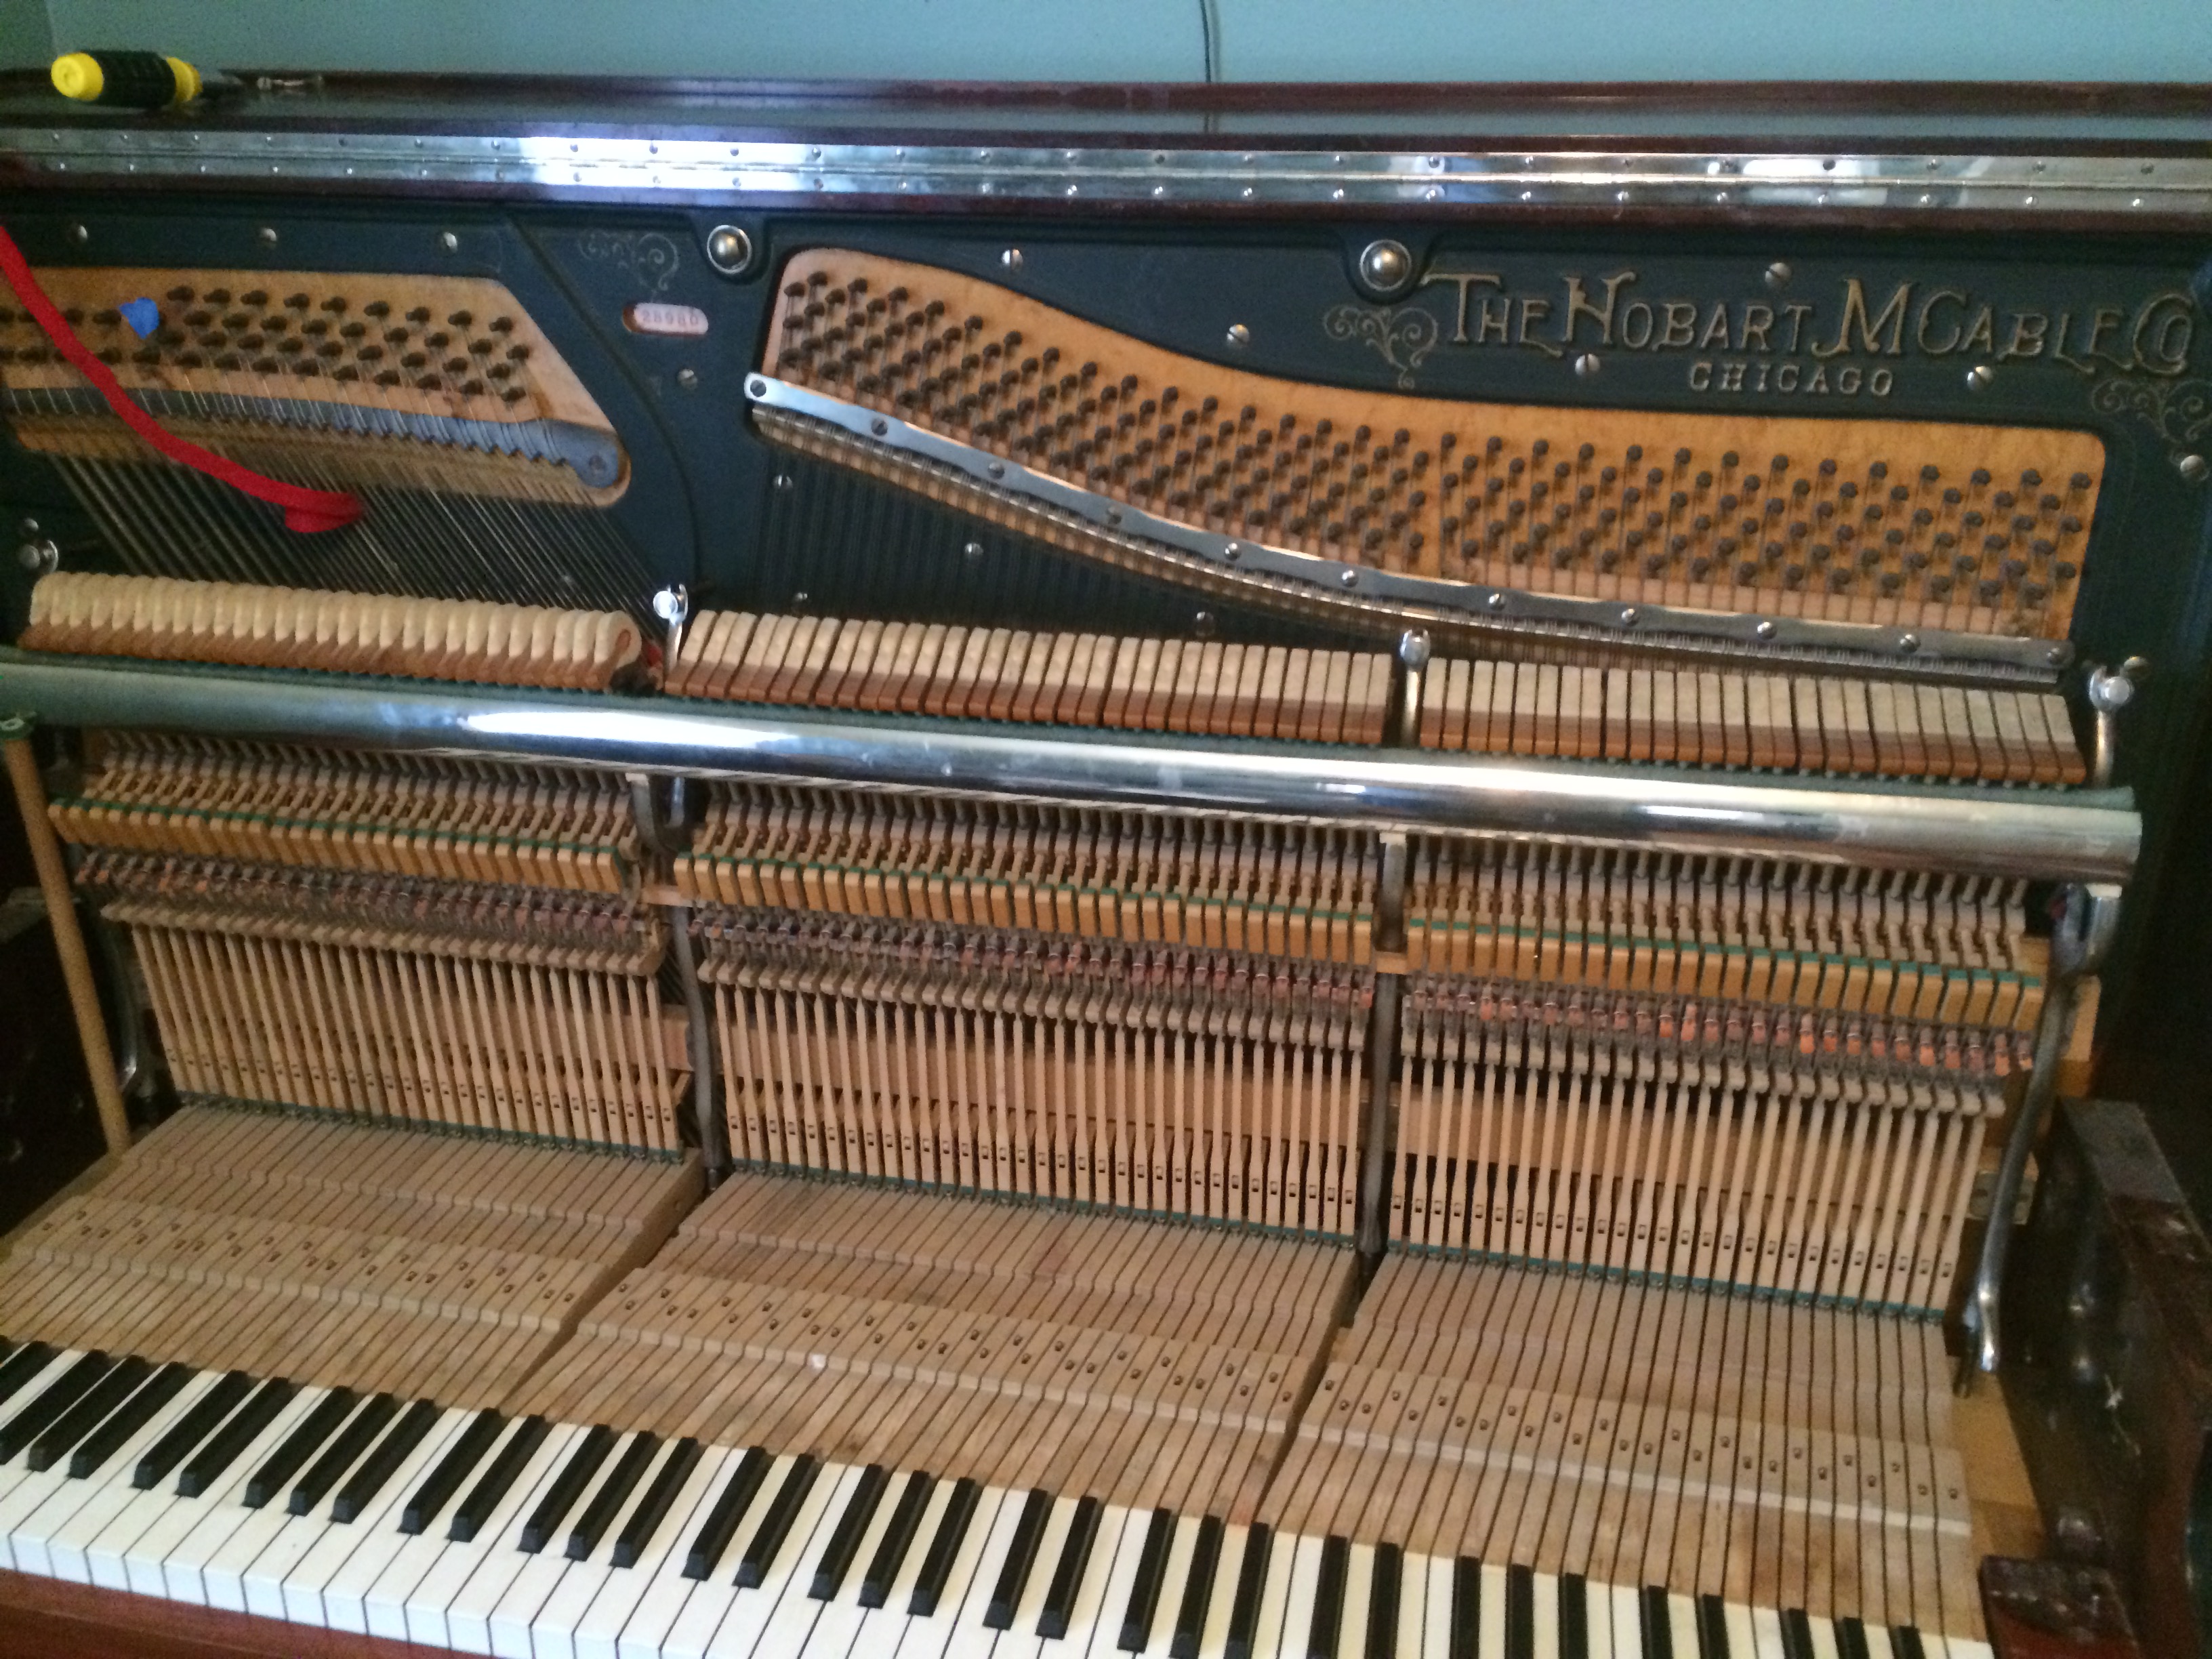 Werner Piano Serial Number Locationinstmankl